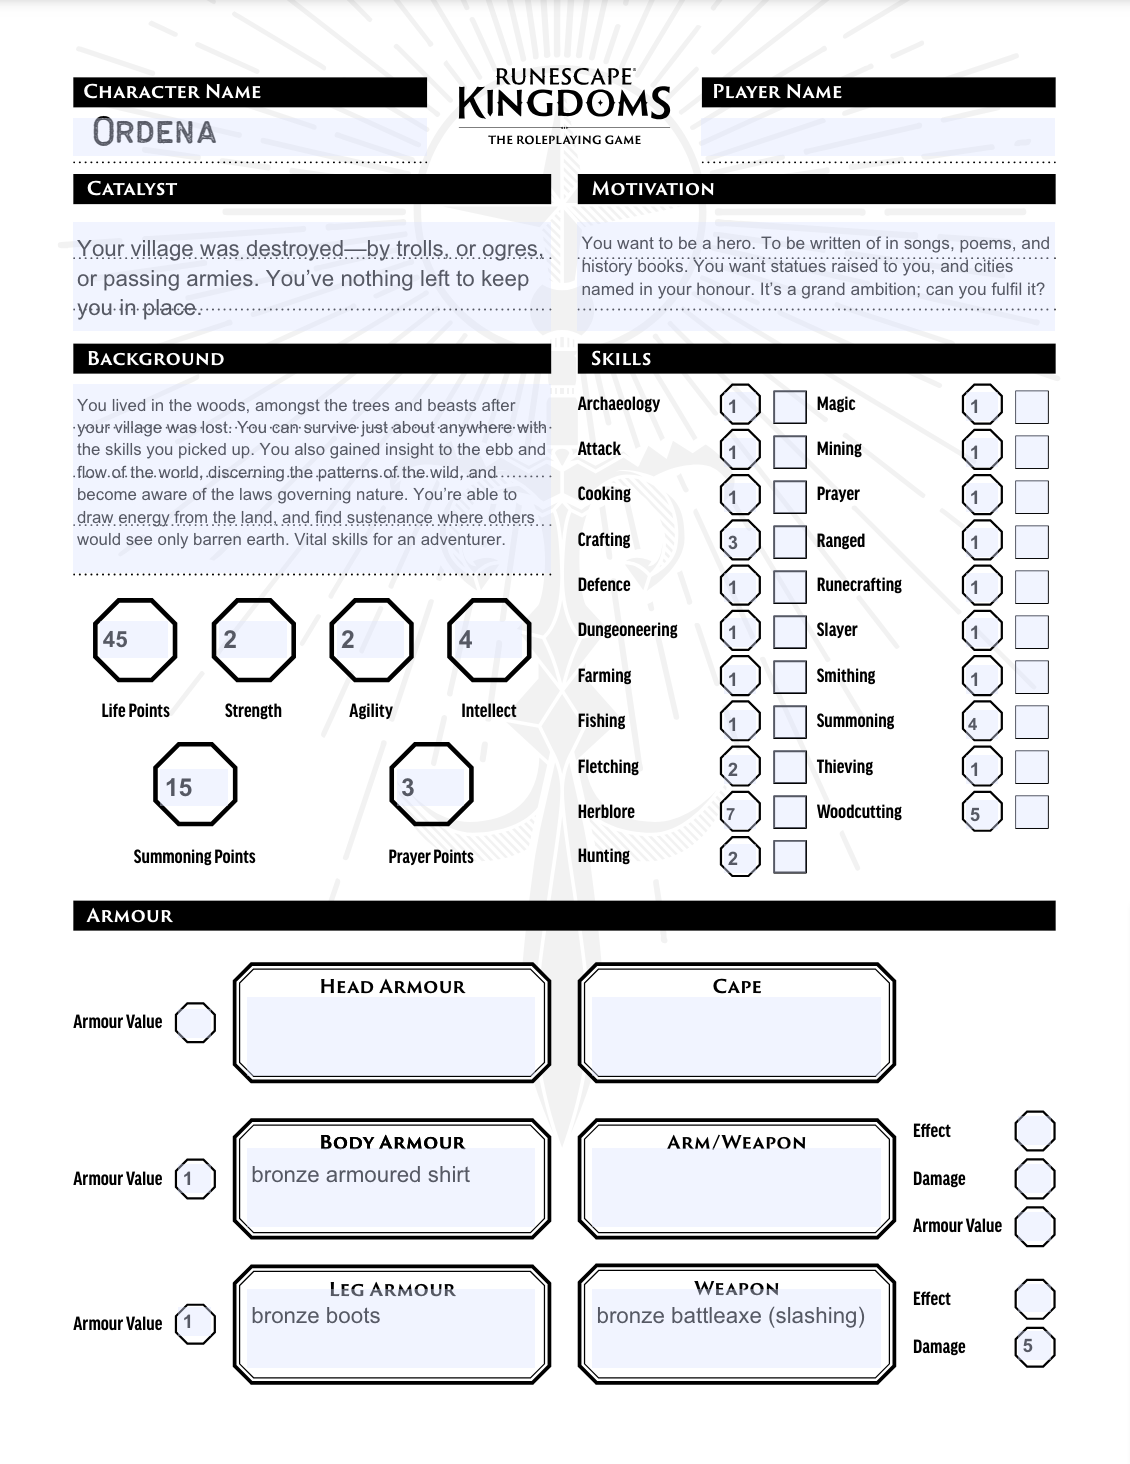 RuneScape Kingdoms: Roleplaying Game Character Sheet - Ordena - Forester Druid (PDF)